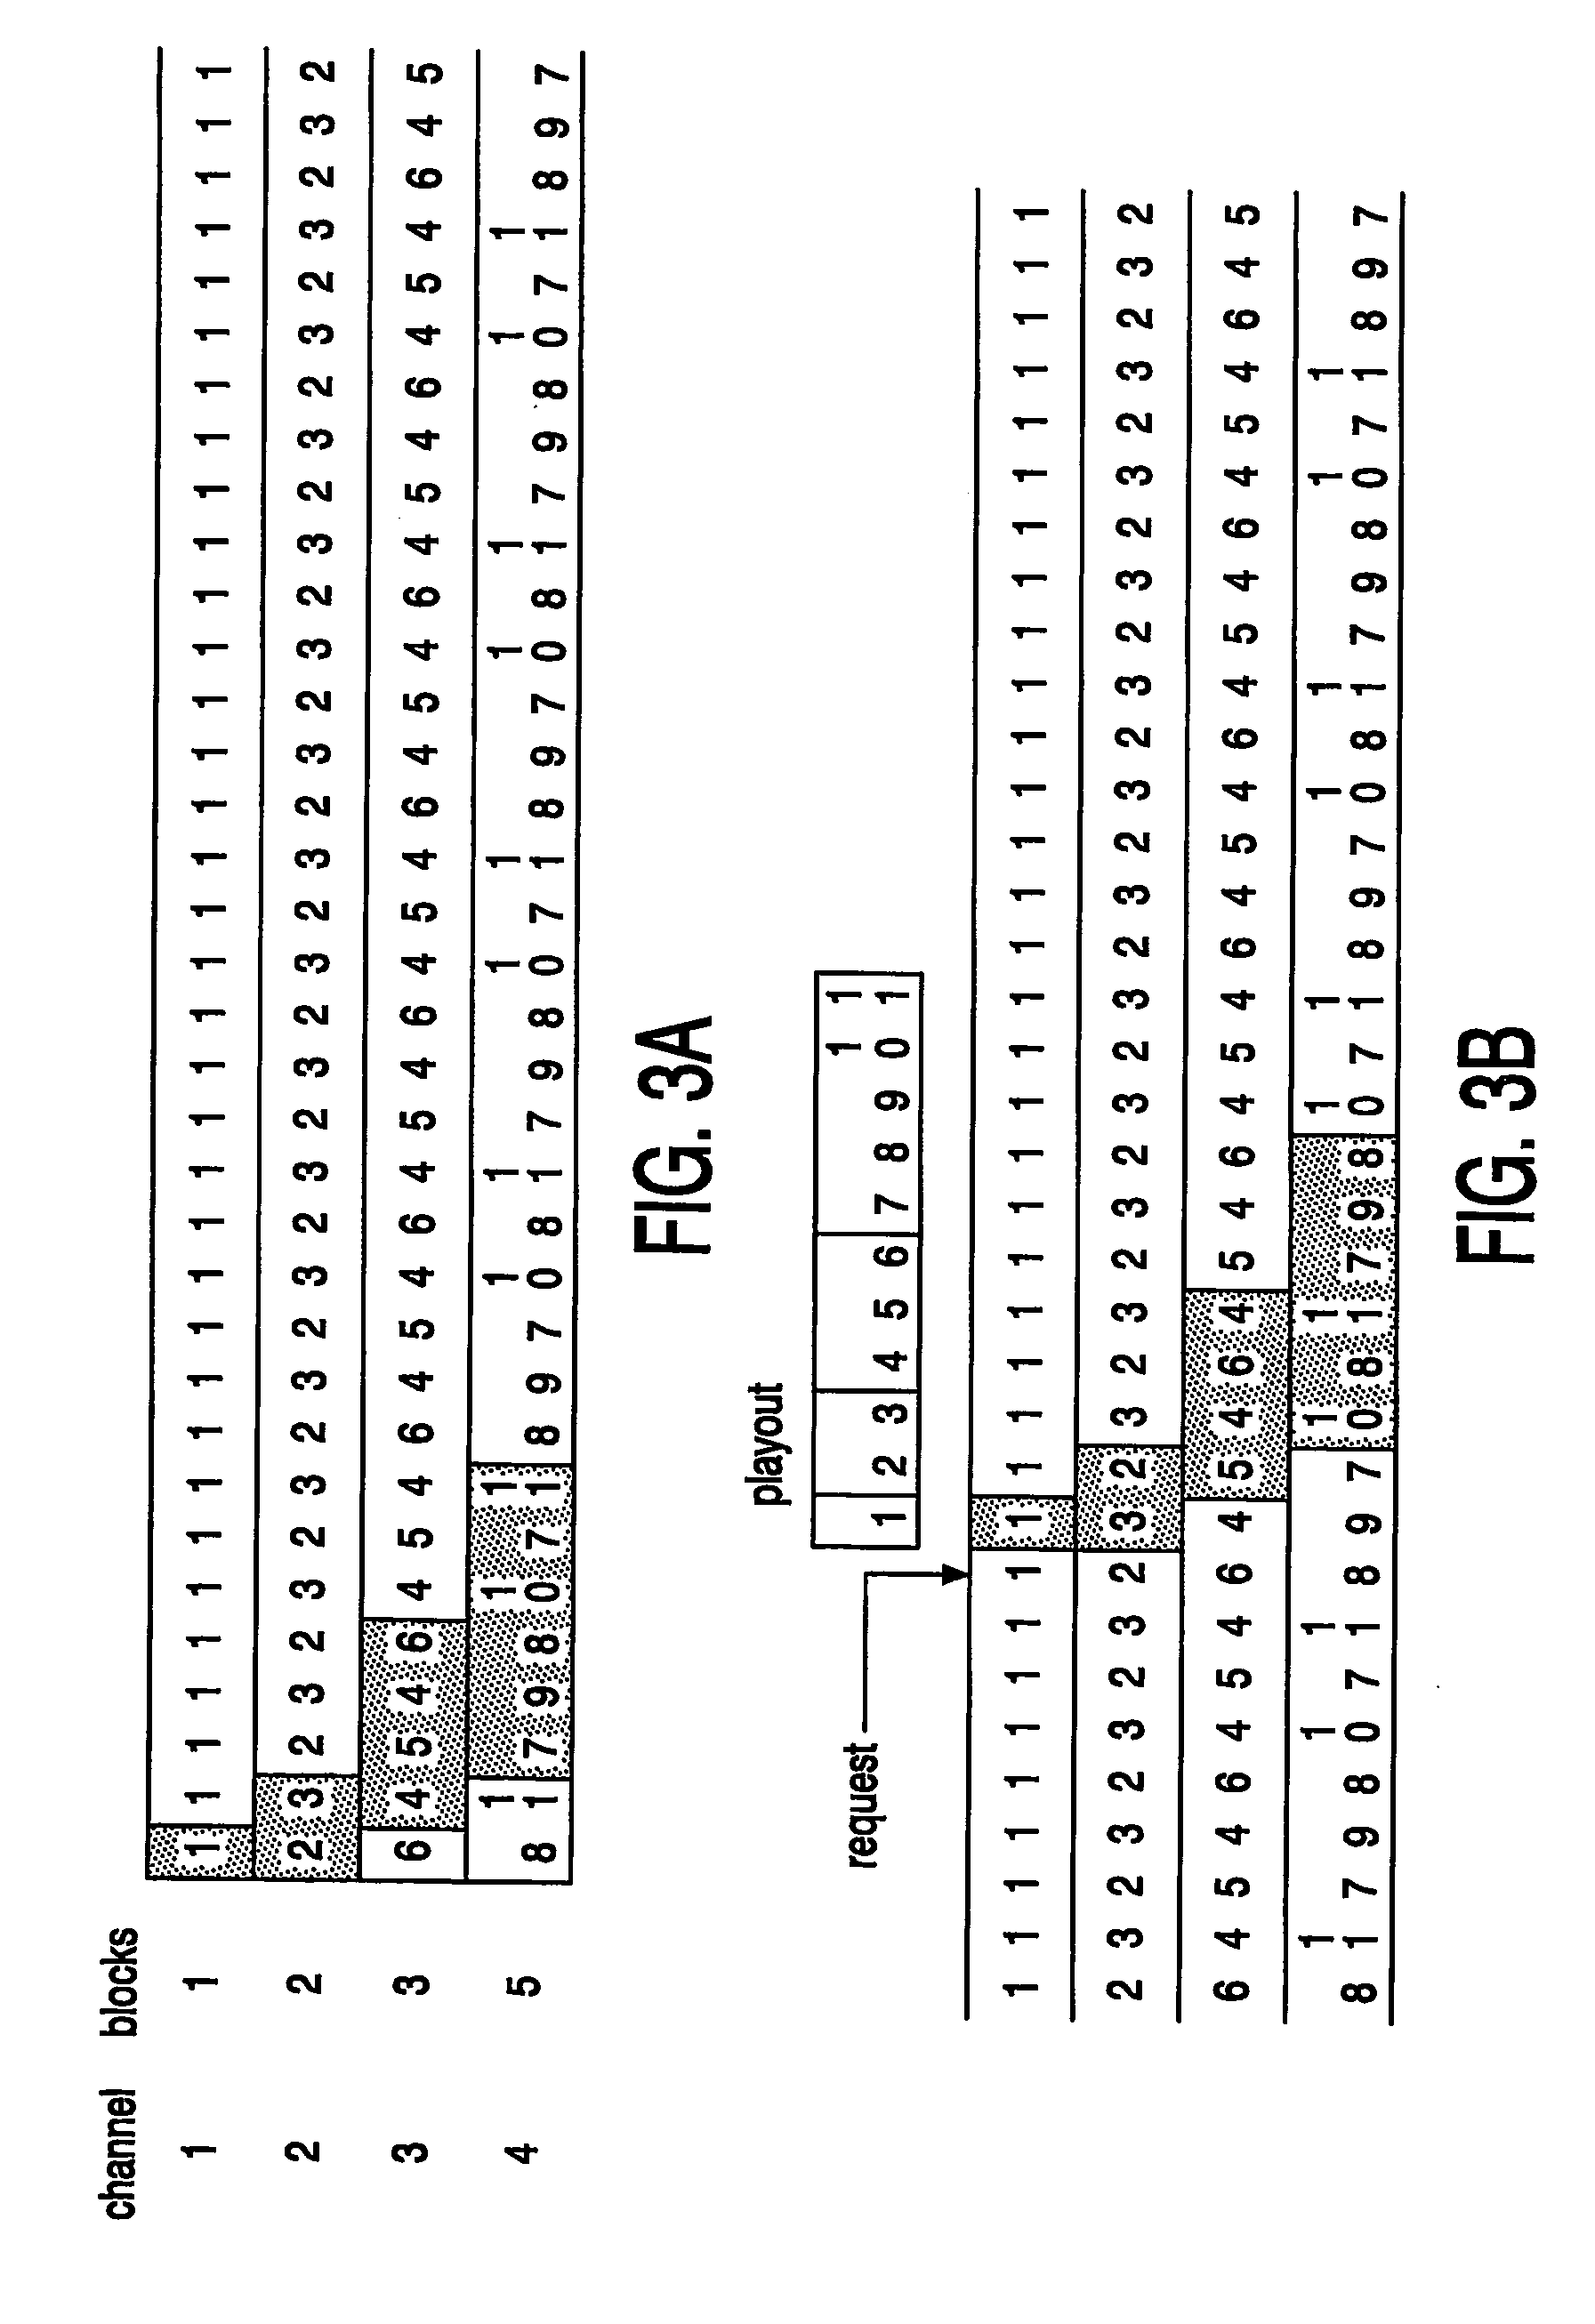 Channel tapping in a near-video-on-demand system